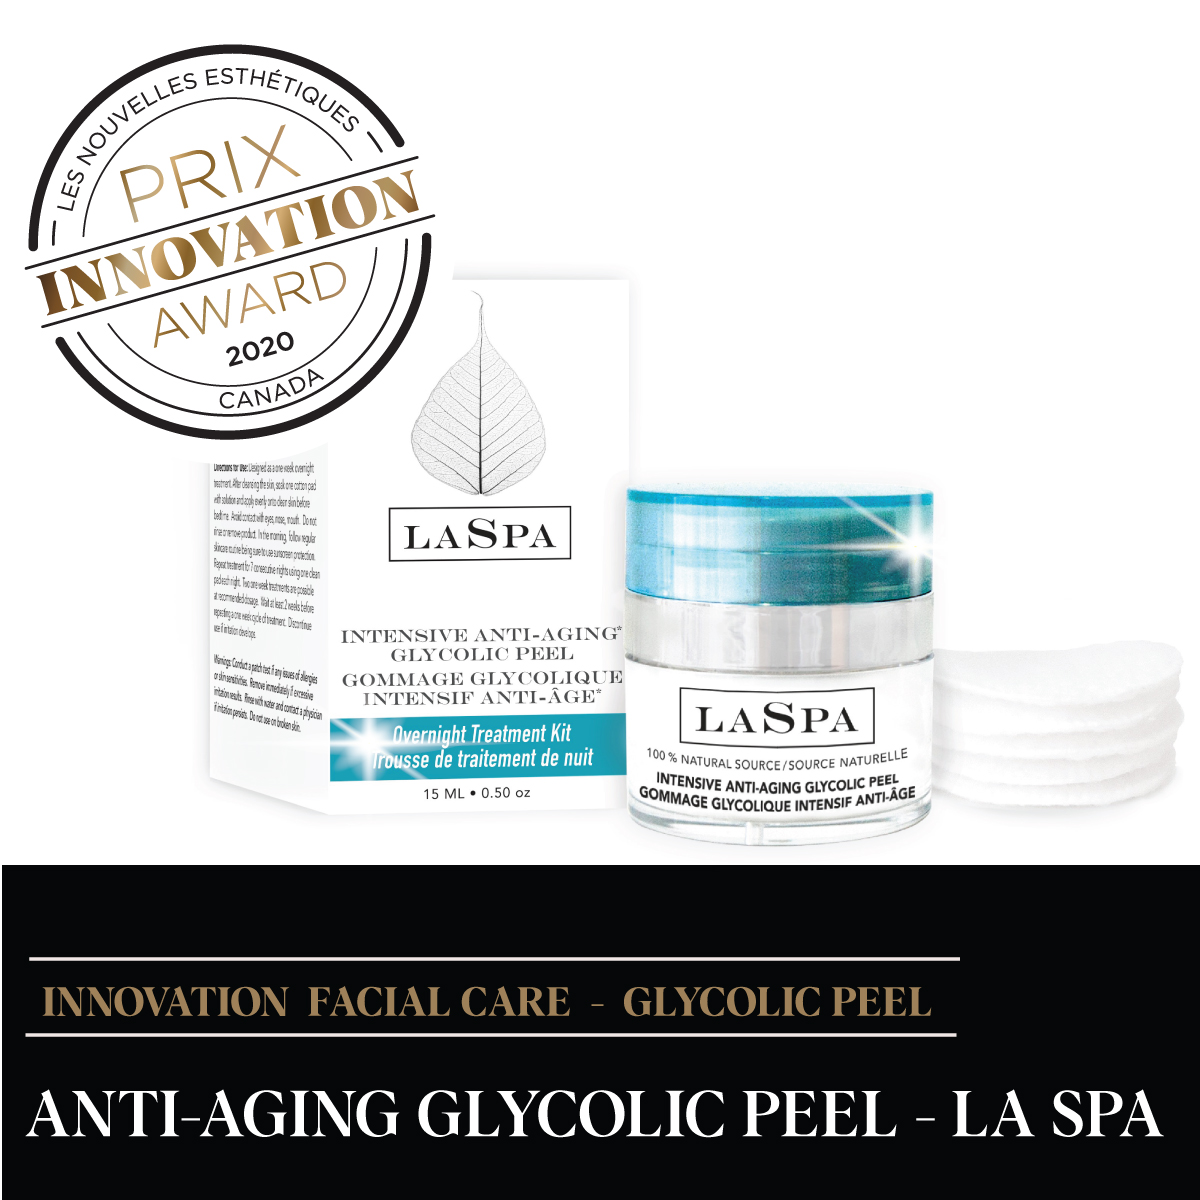 LASPA ANTI-AGING GLYCOLIC PEEL is winner of Facial Care Innovation category by LES NOUVELLES ESTHETIQUES CANADA